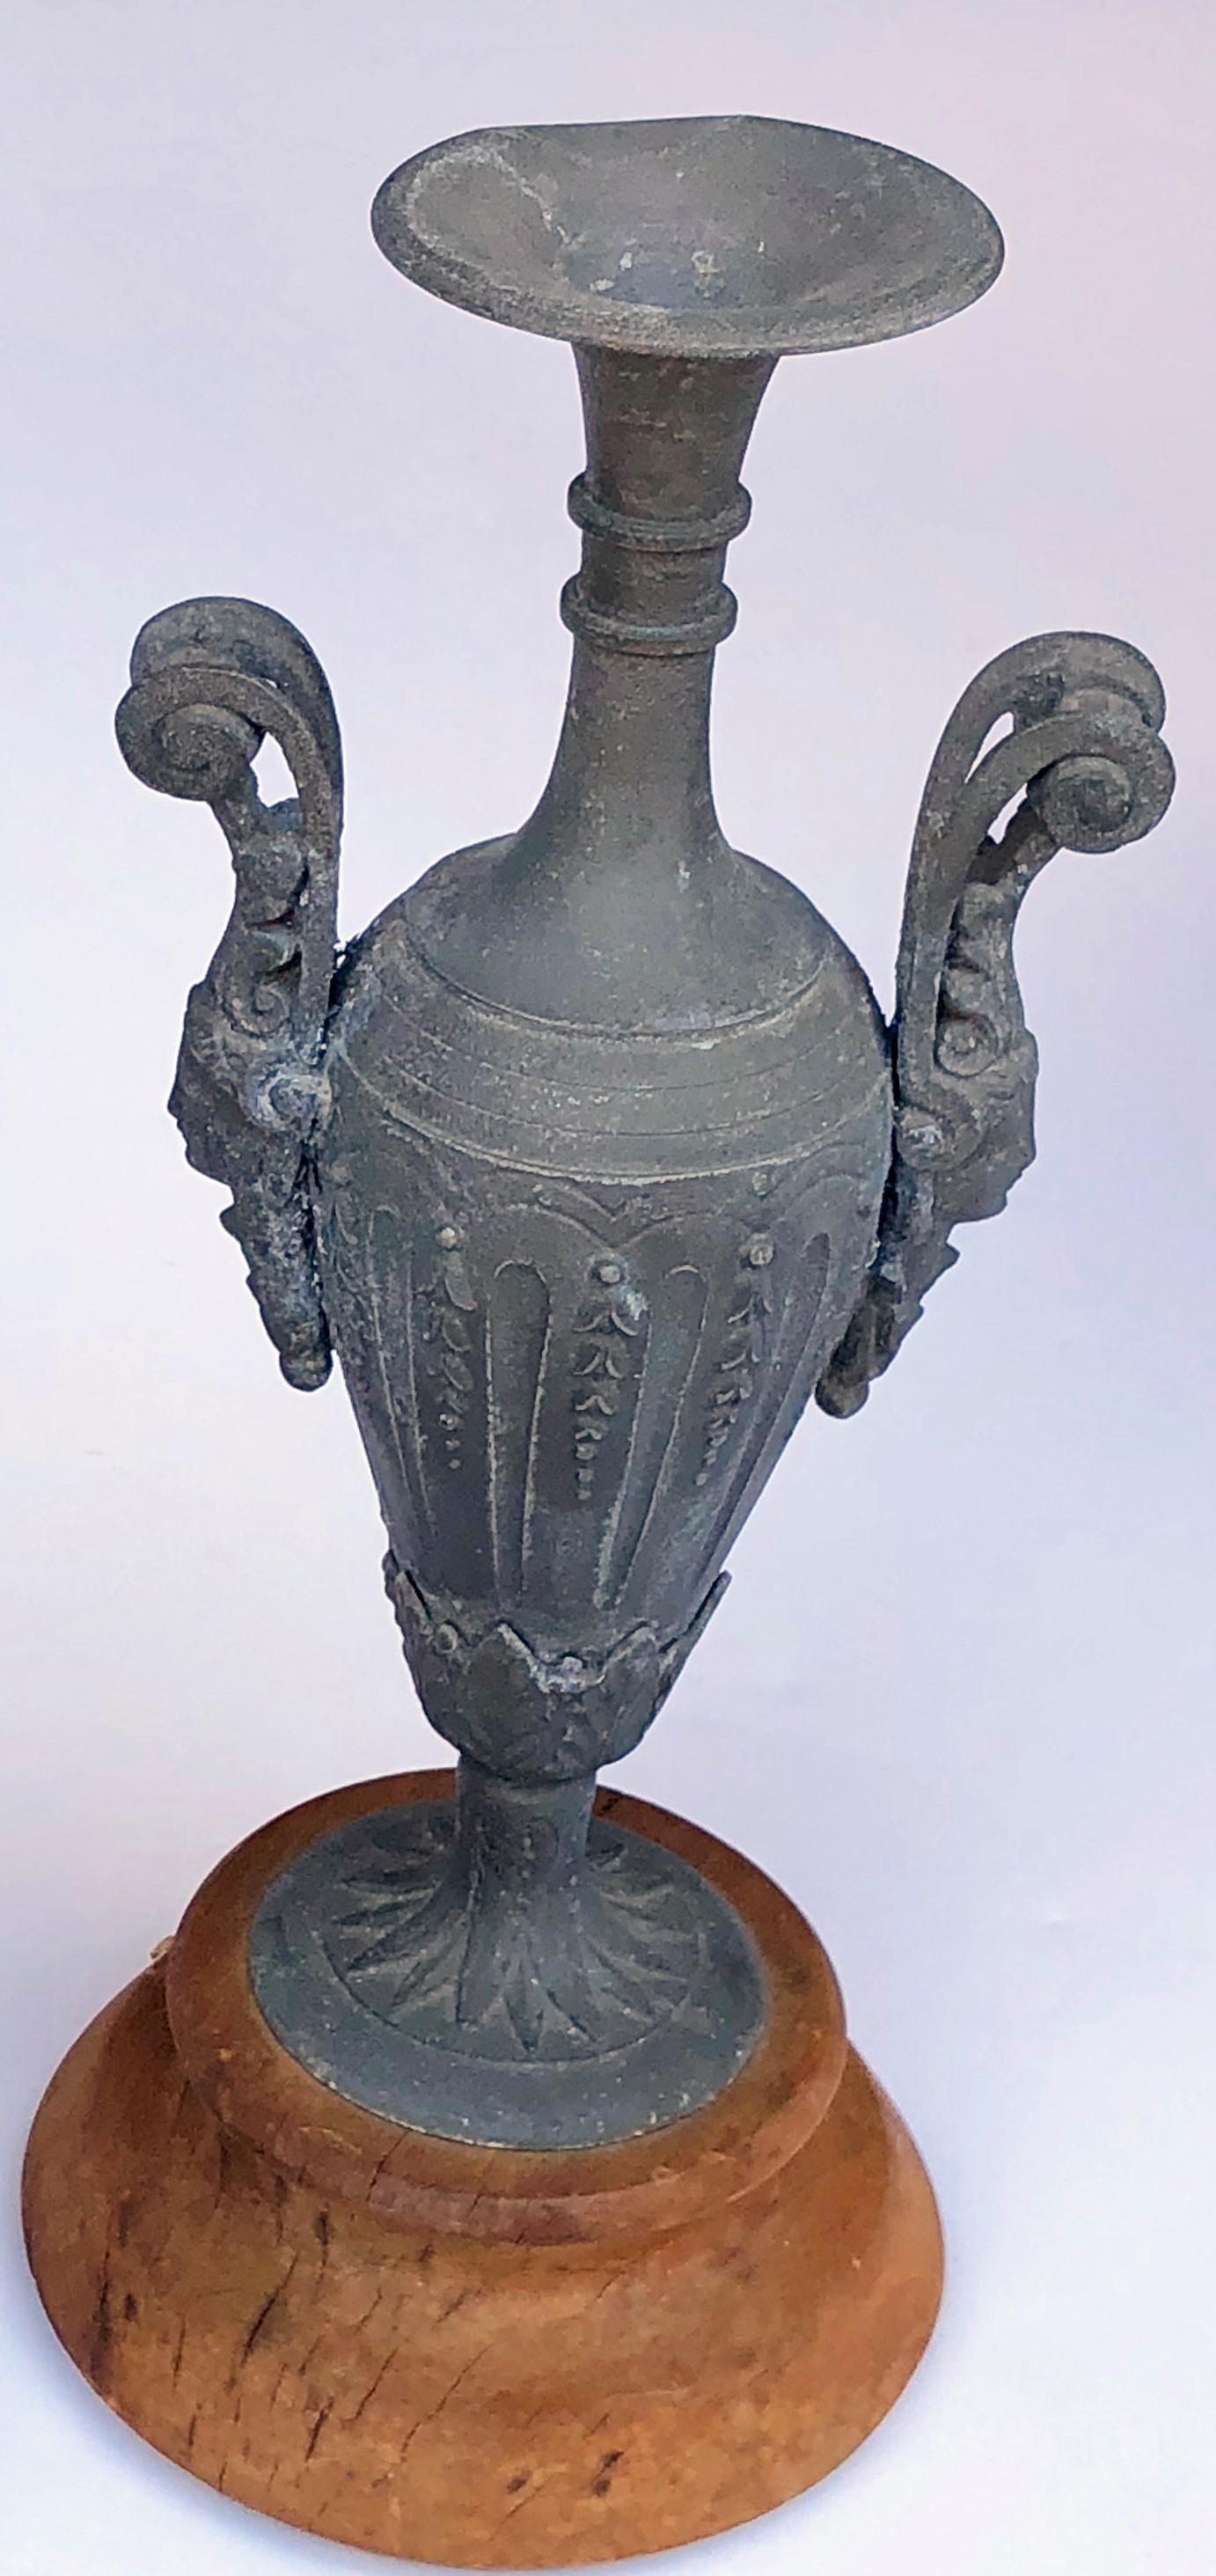 Elegant Pair of French Louis XVI Style Double-Handled Spelter-Metal Urns In Good Condition For Sale In San Francisco, CA